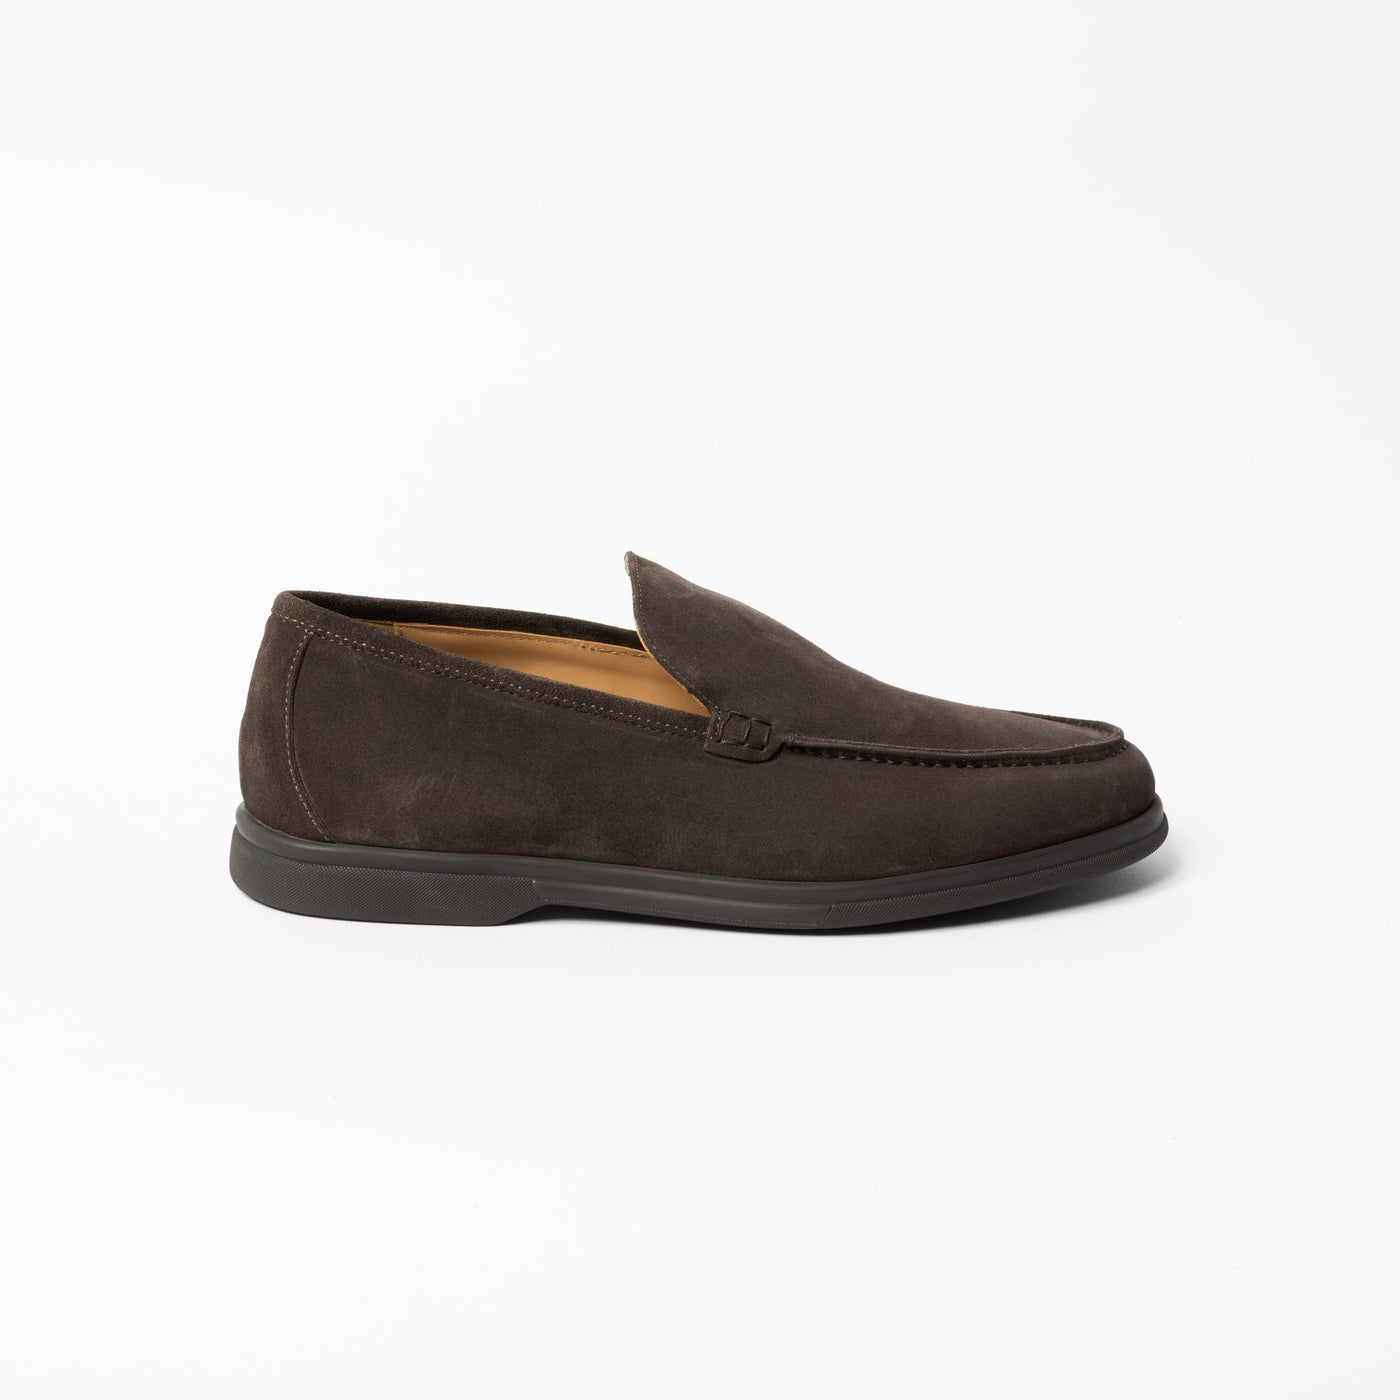 MINIMAL LOAFERS by MANO BROWN